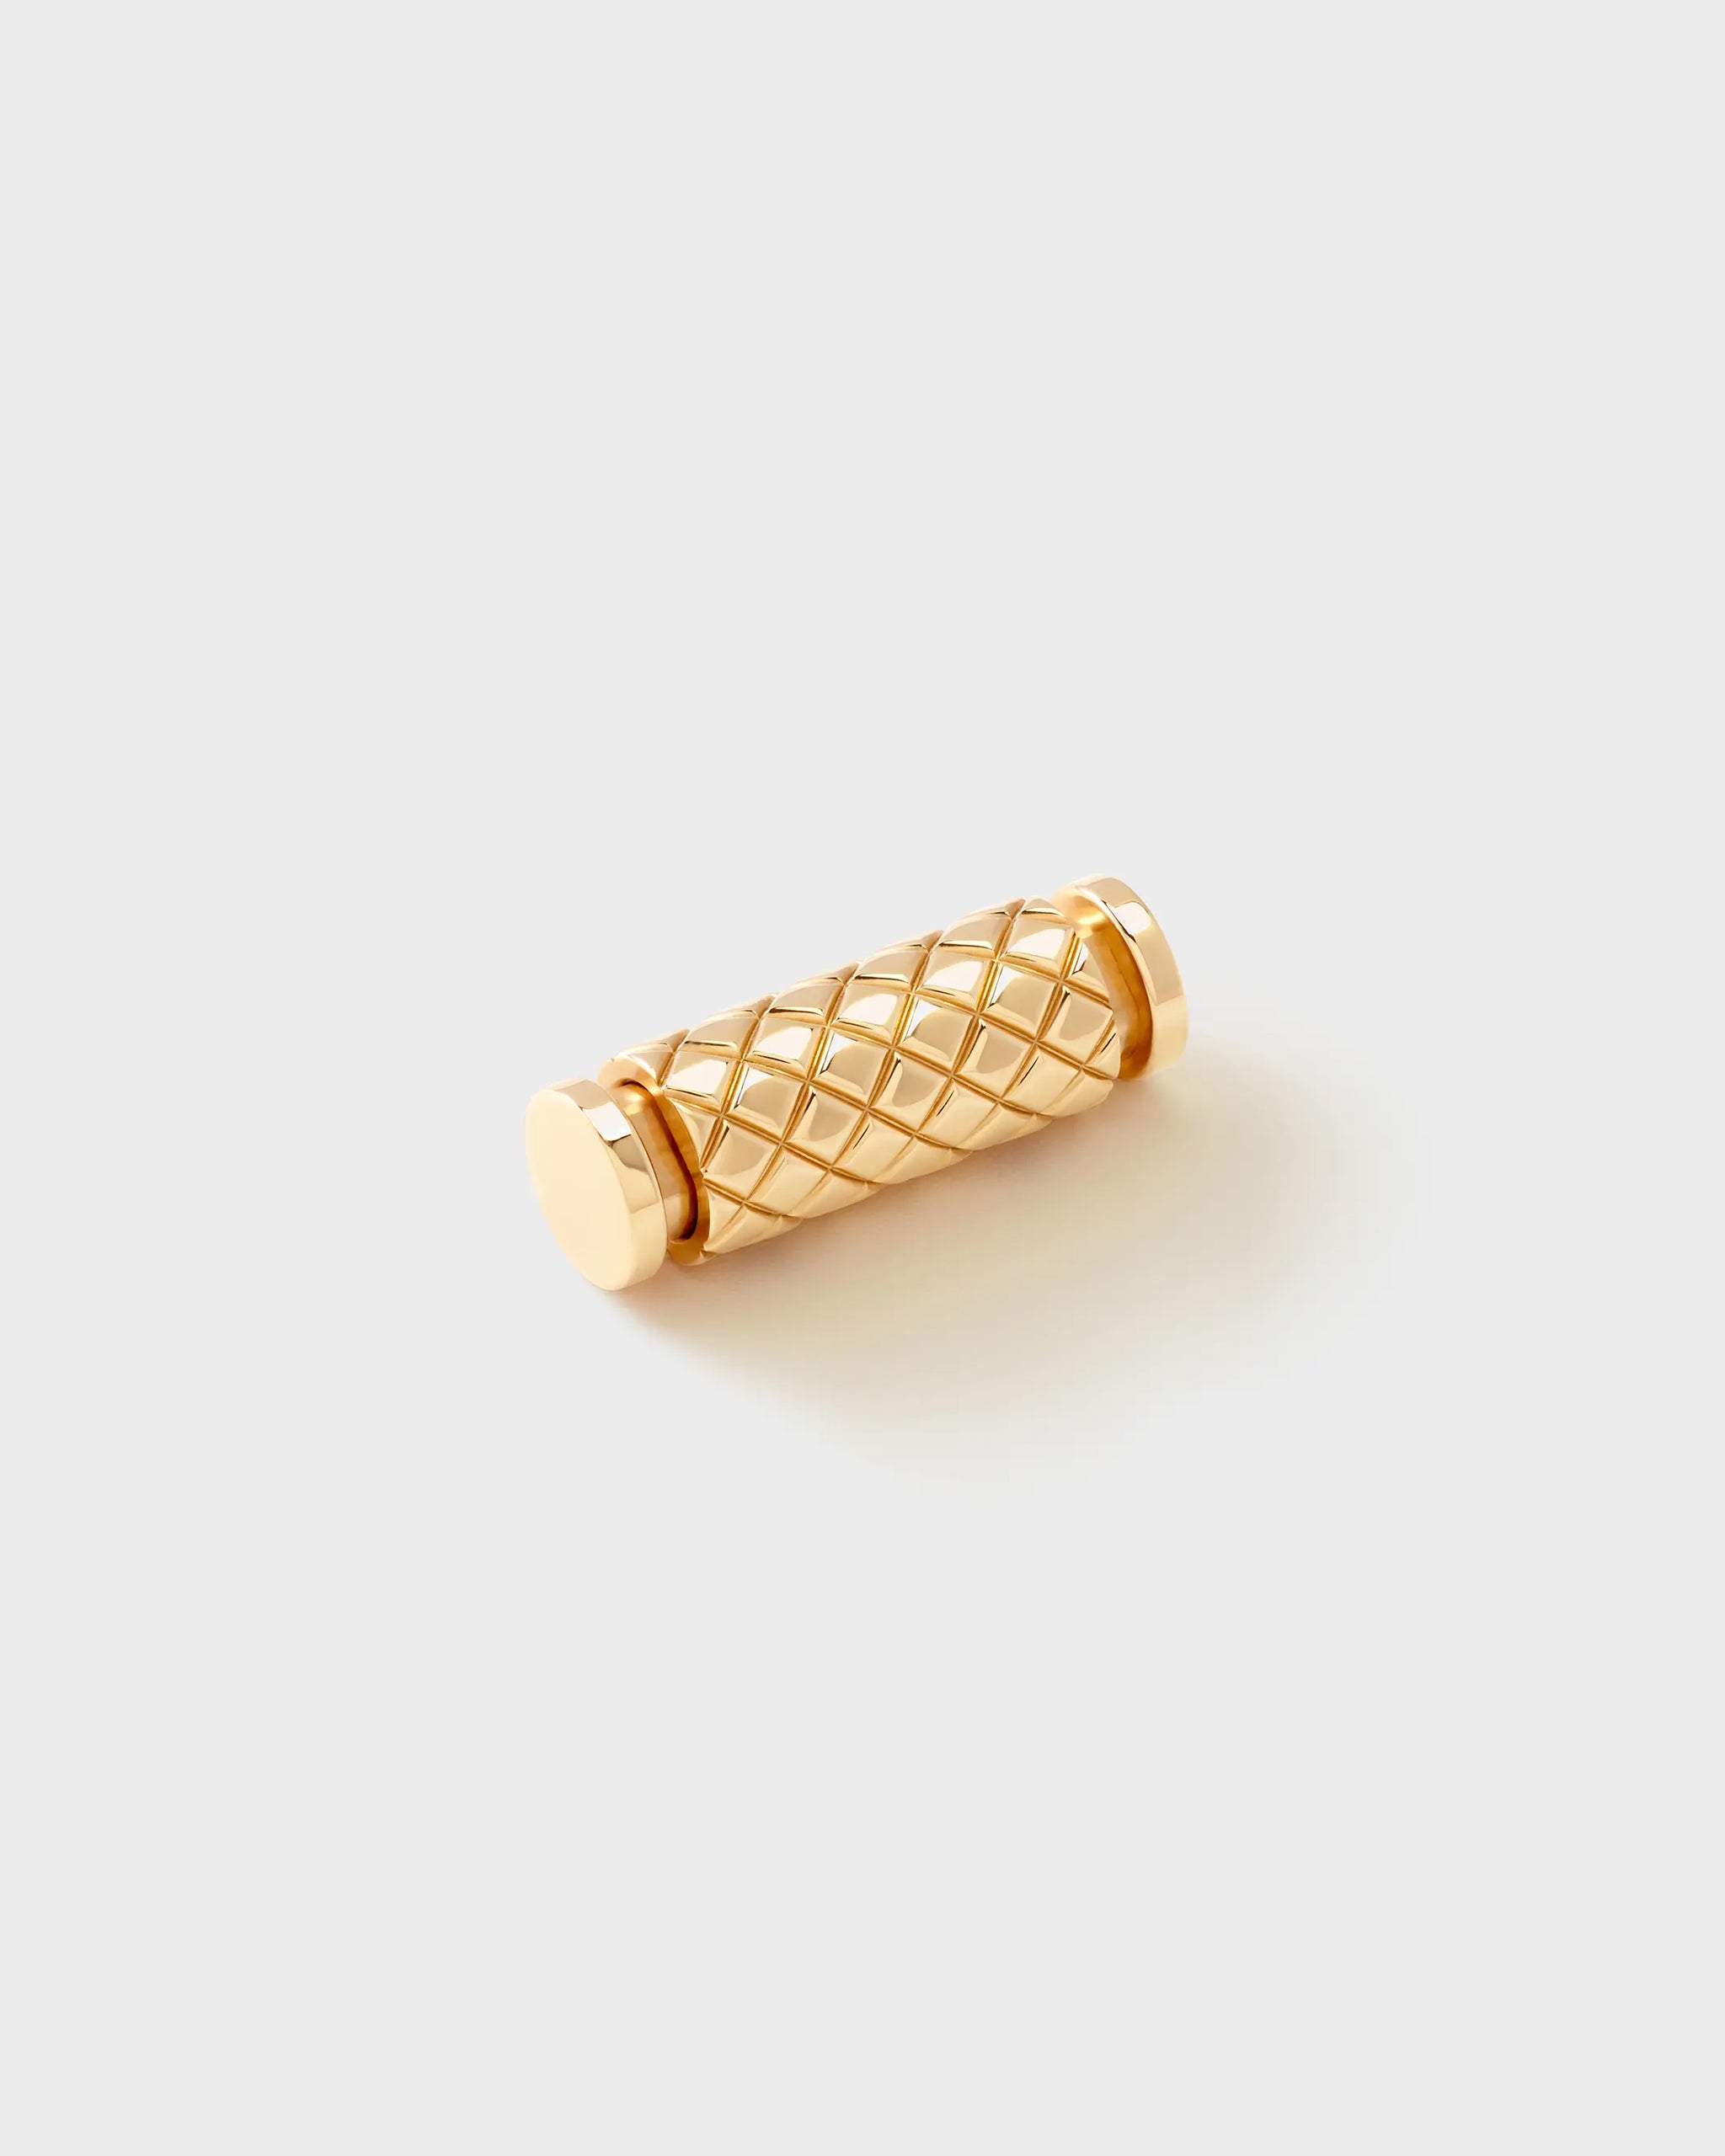 Latch Pendant in Yellow Gold - 1 - Nouvel Heritage